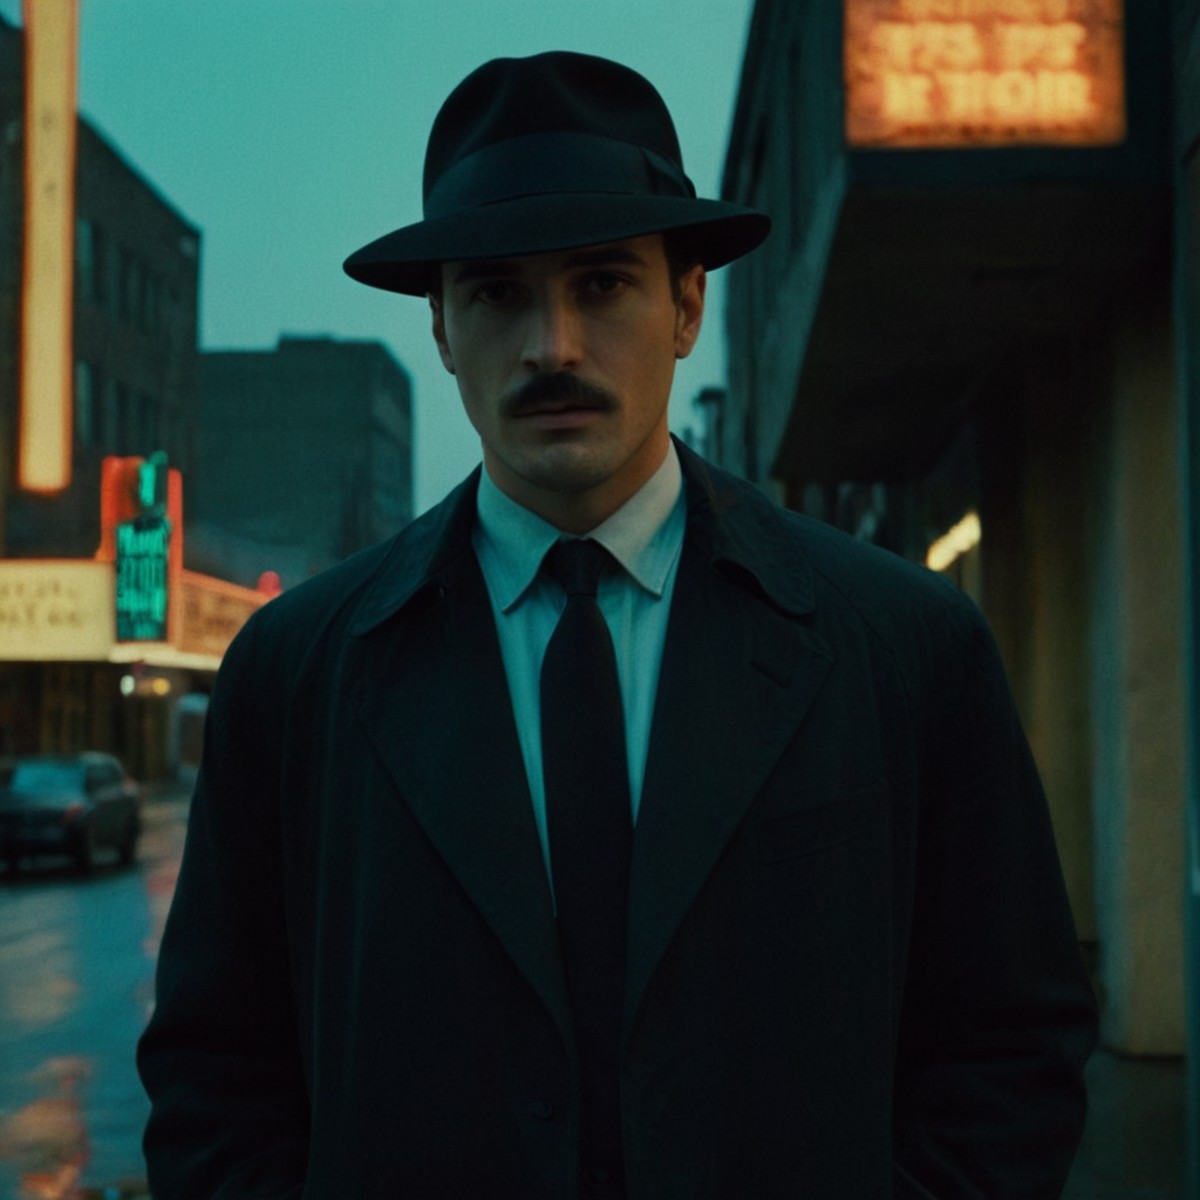 Neon noir, classic film noir style <lora:Classic Film Noir style:1> 
a man in a hat and coat standing outside of a buildin...